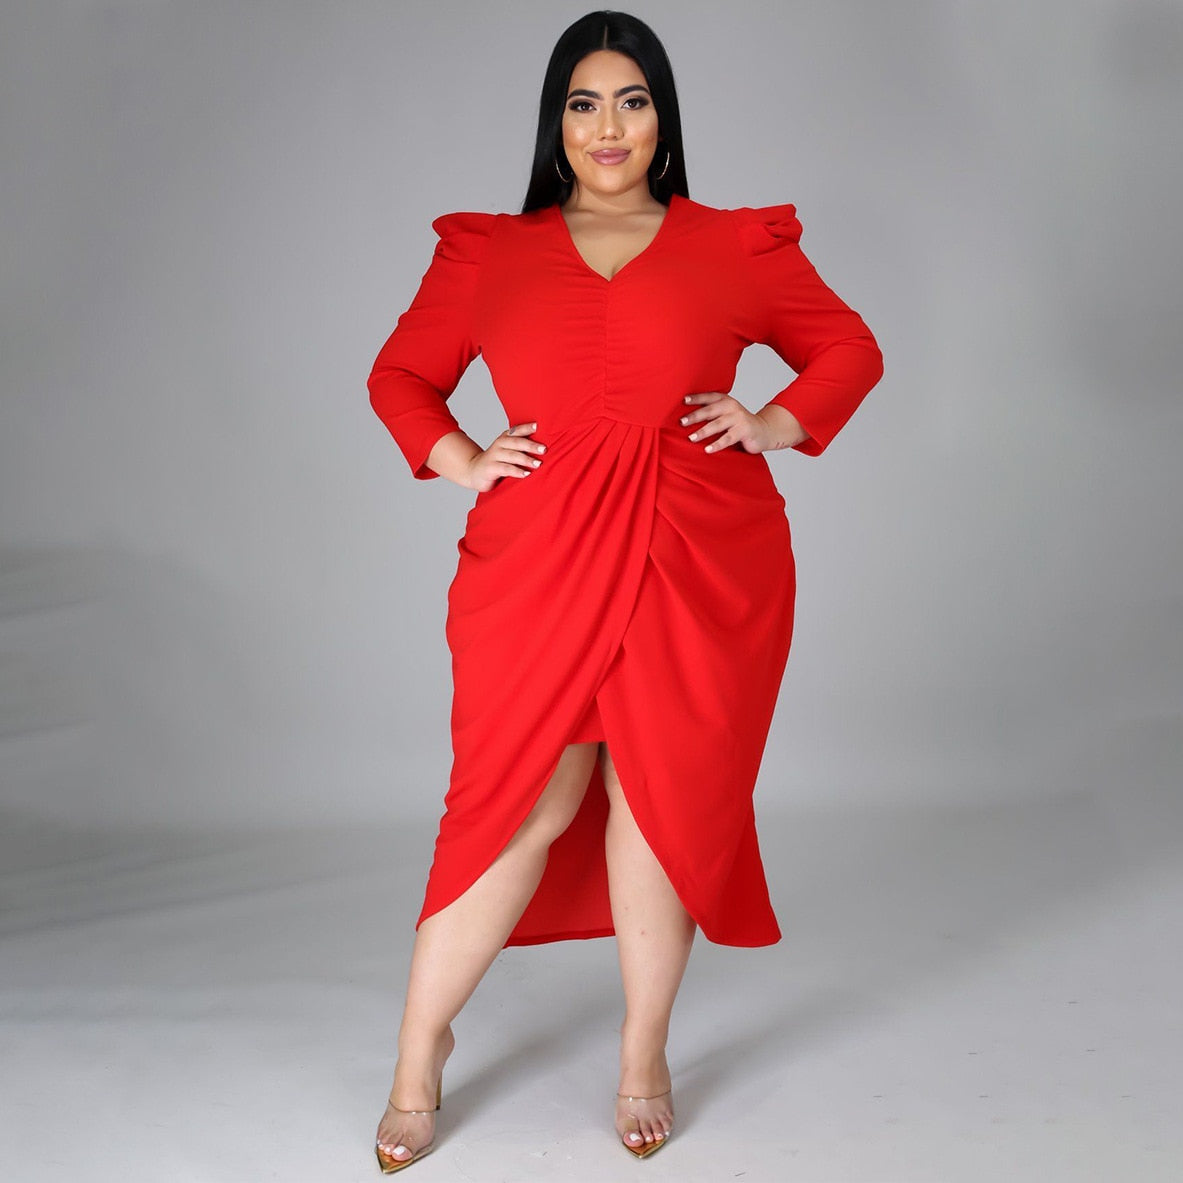 Aovica Plus Size Elegant Fashion Dress For Women Autumn Puff Sleeve Pleated Bodycon Split Mid Vestidos Night Party Robes Office Lady